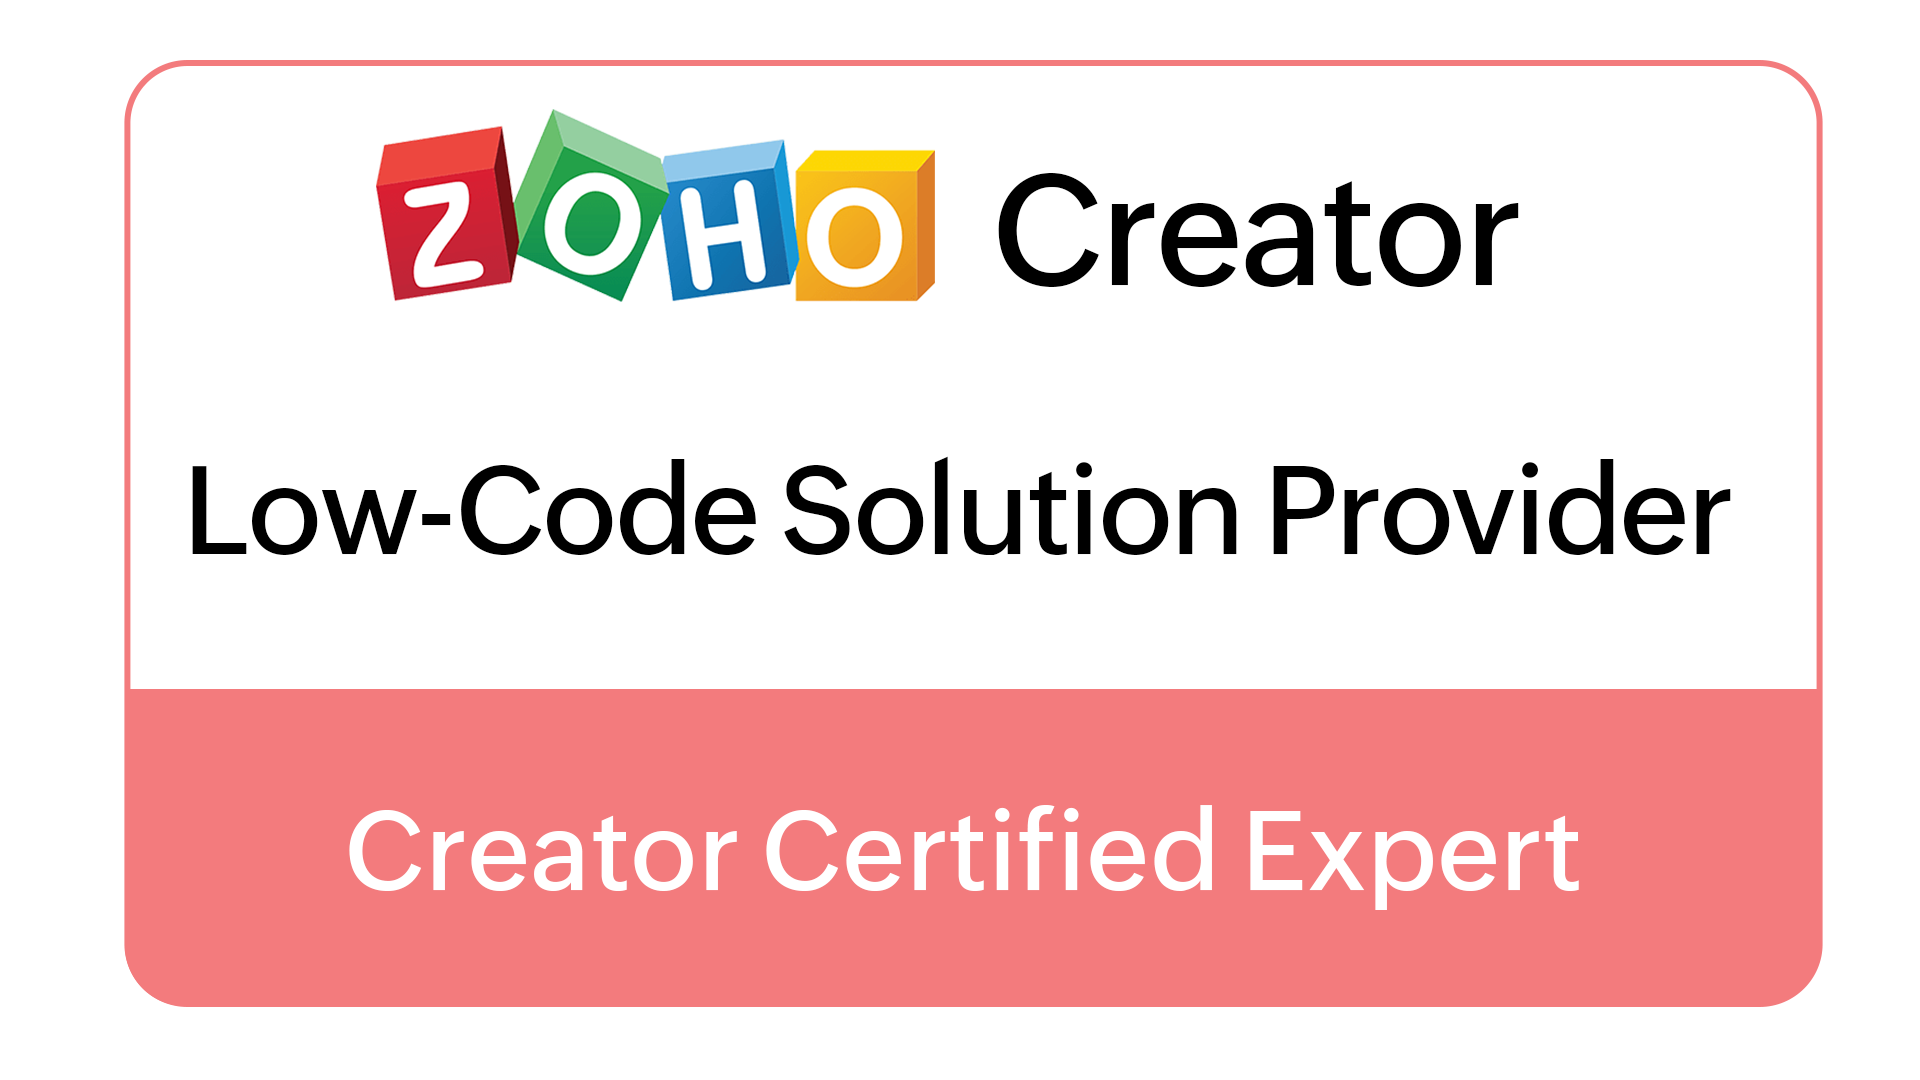 Zoho Creator Low-code Solution Provider Certified Expert